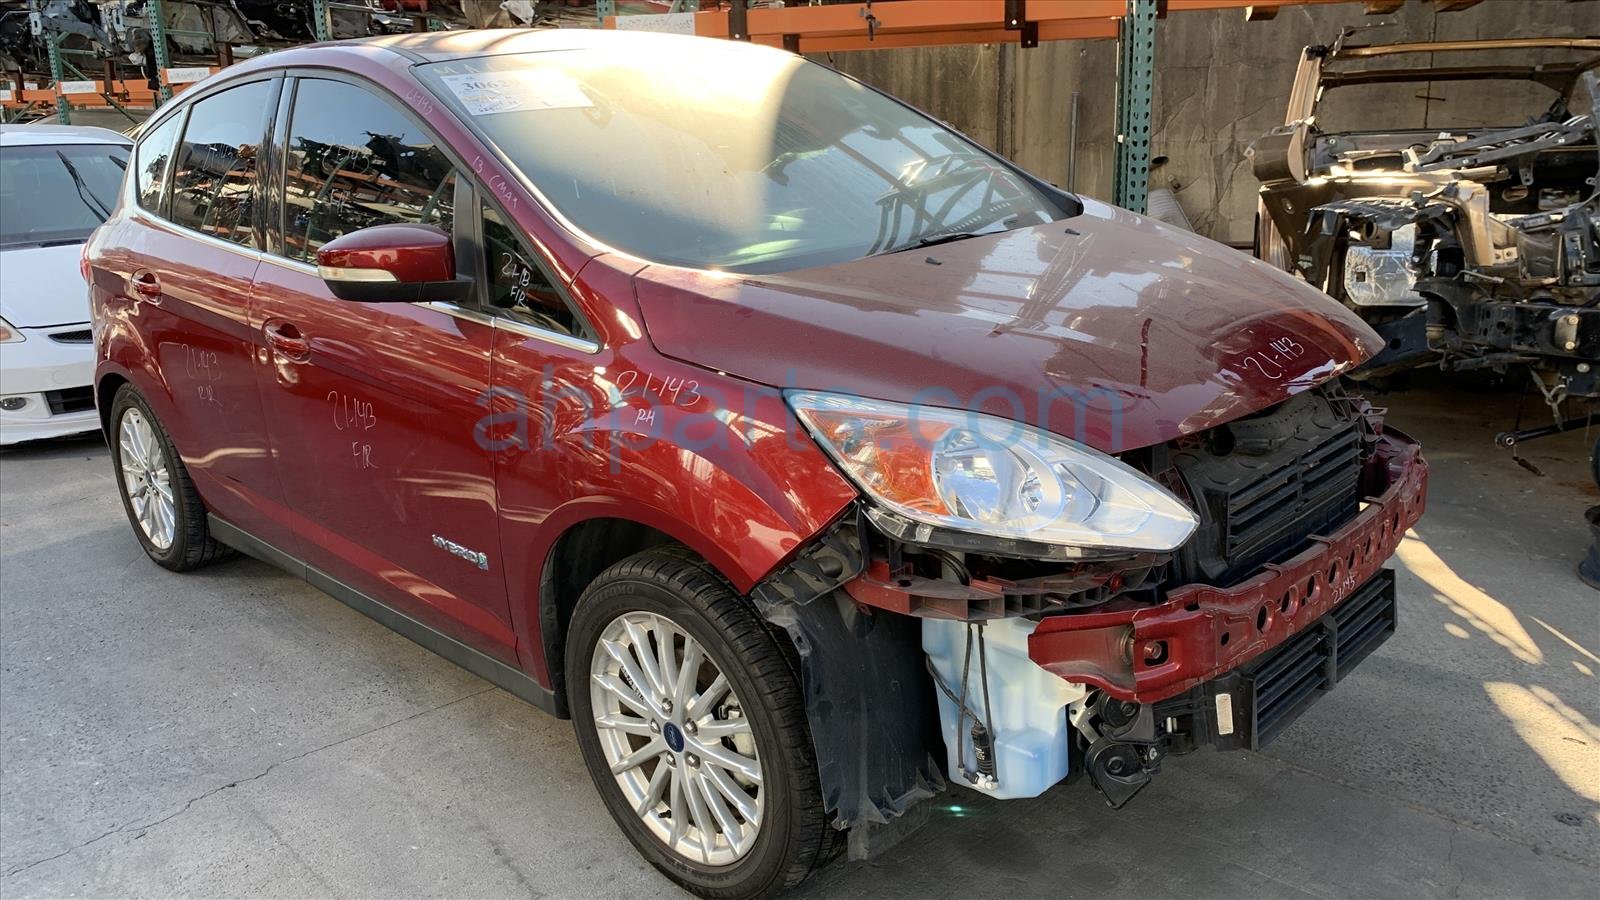 Used OEM Ford C-MAX Parts